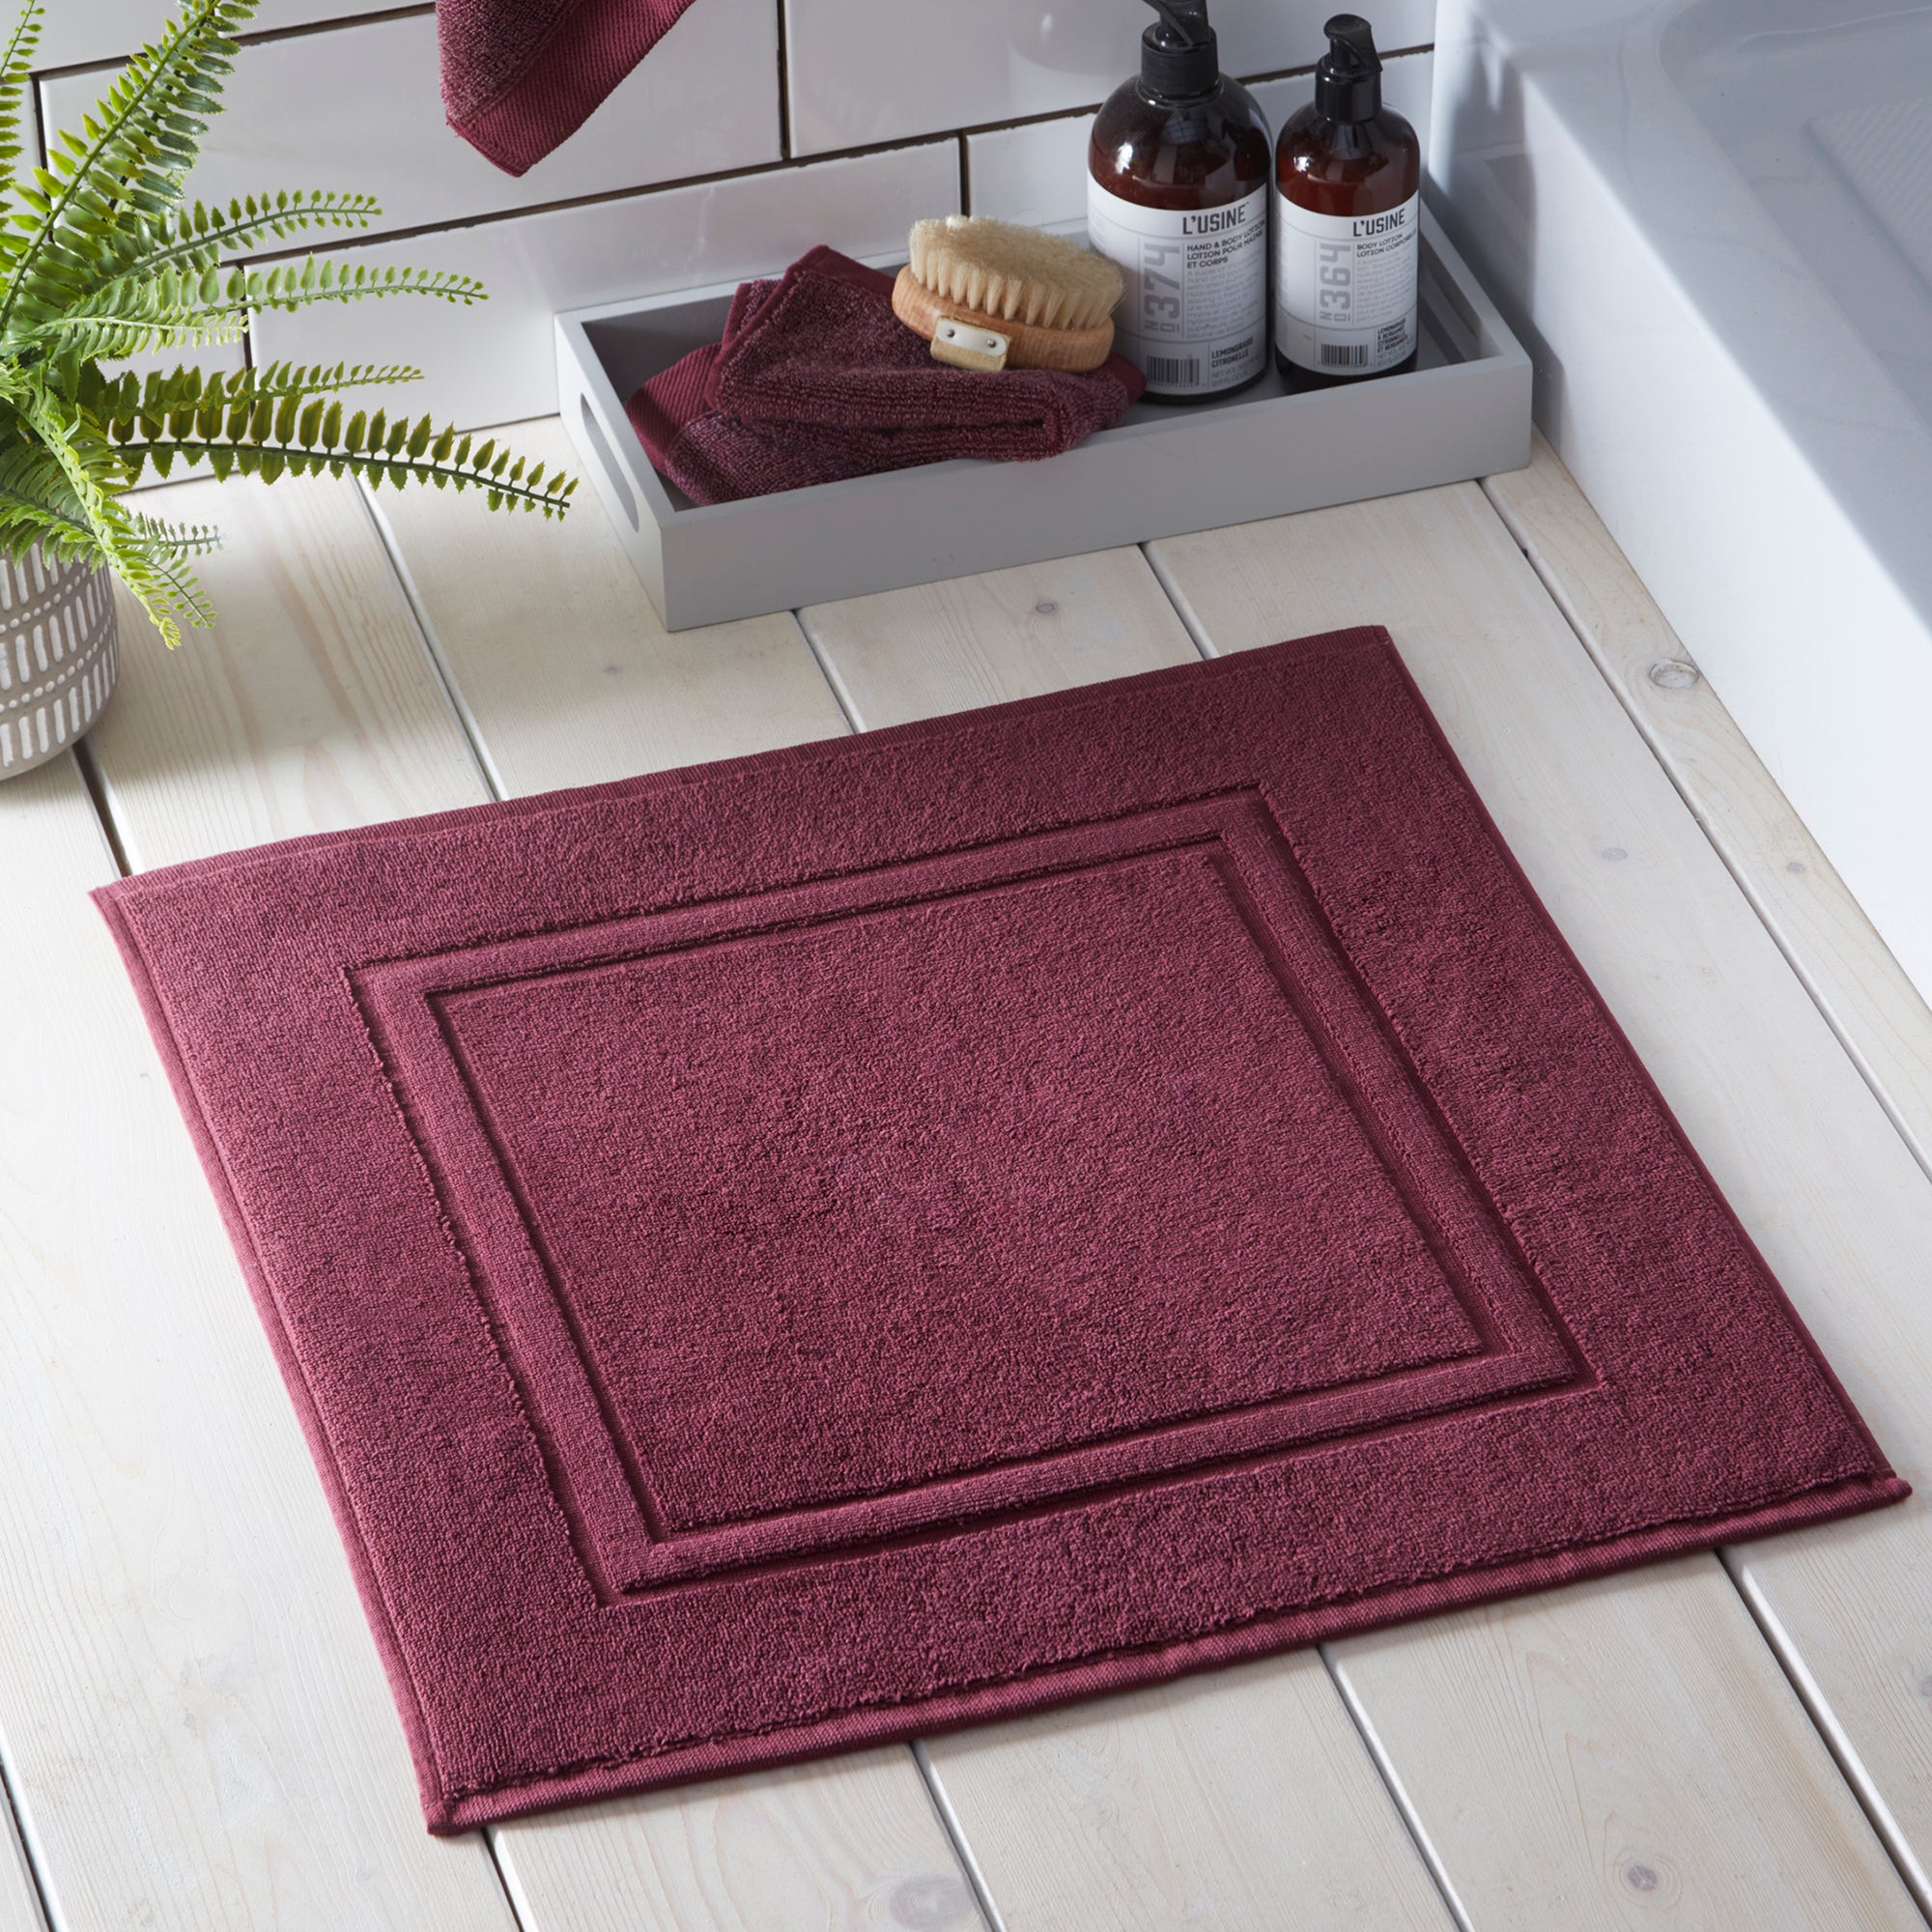 Shower Mat Abode Eco by Drift Home in Claret